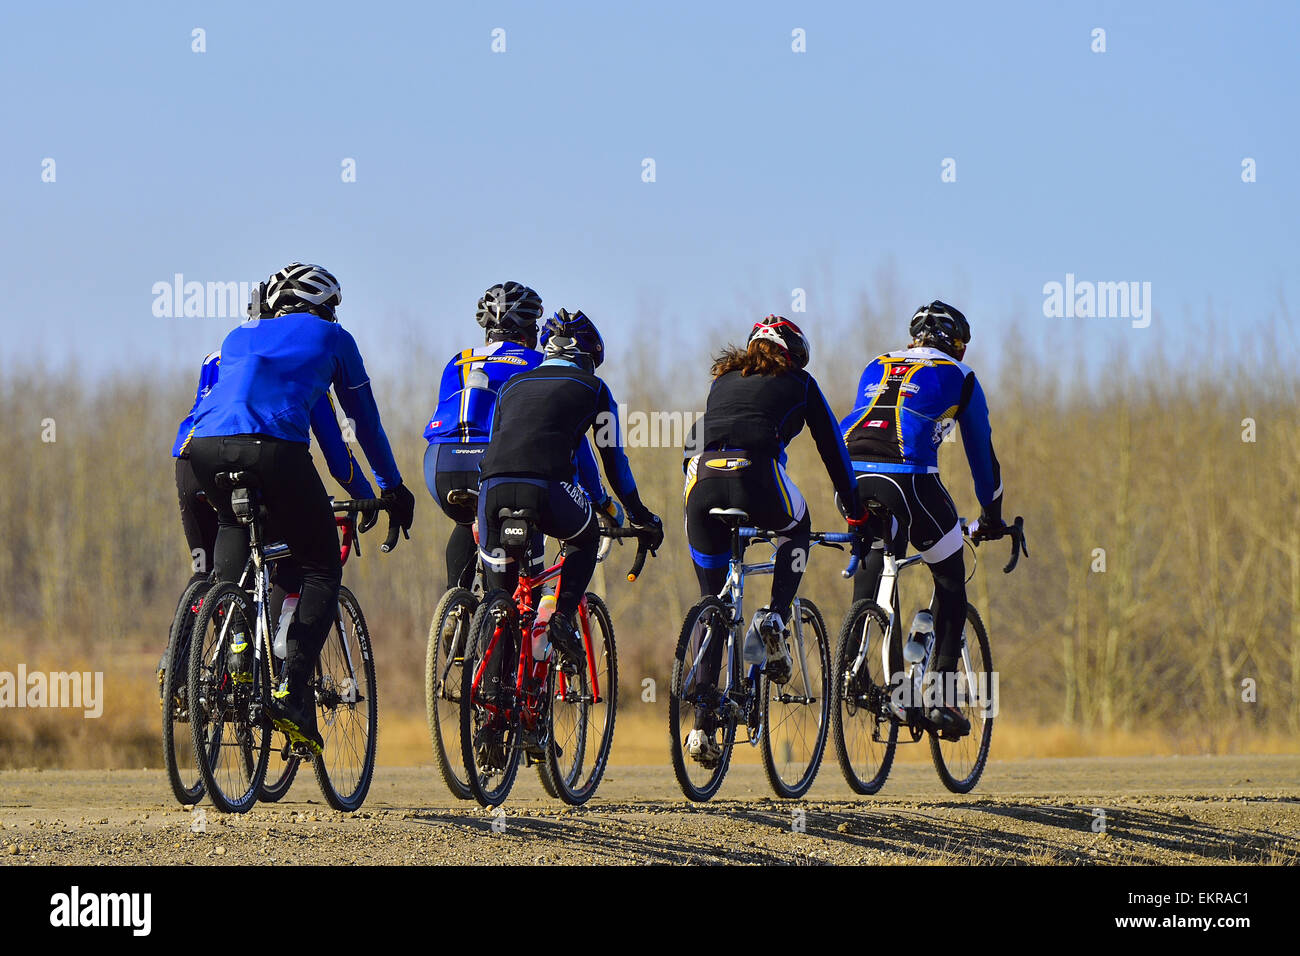 Bicycle racing team riding on a rural Alberta road. Stock Photo